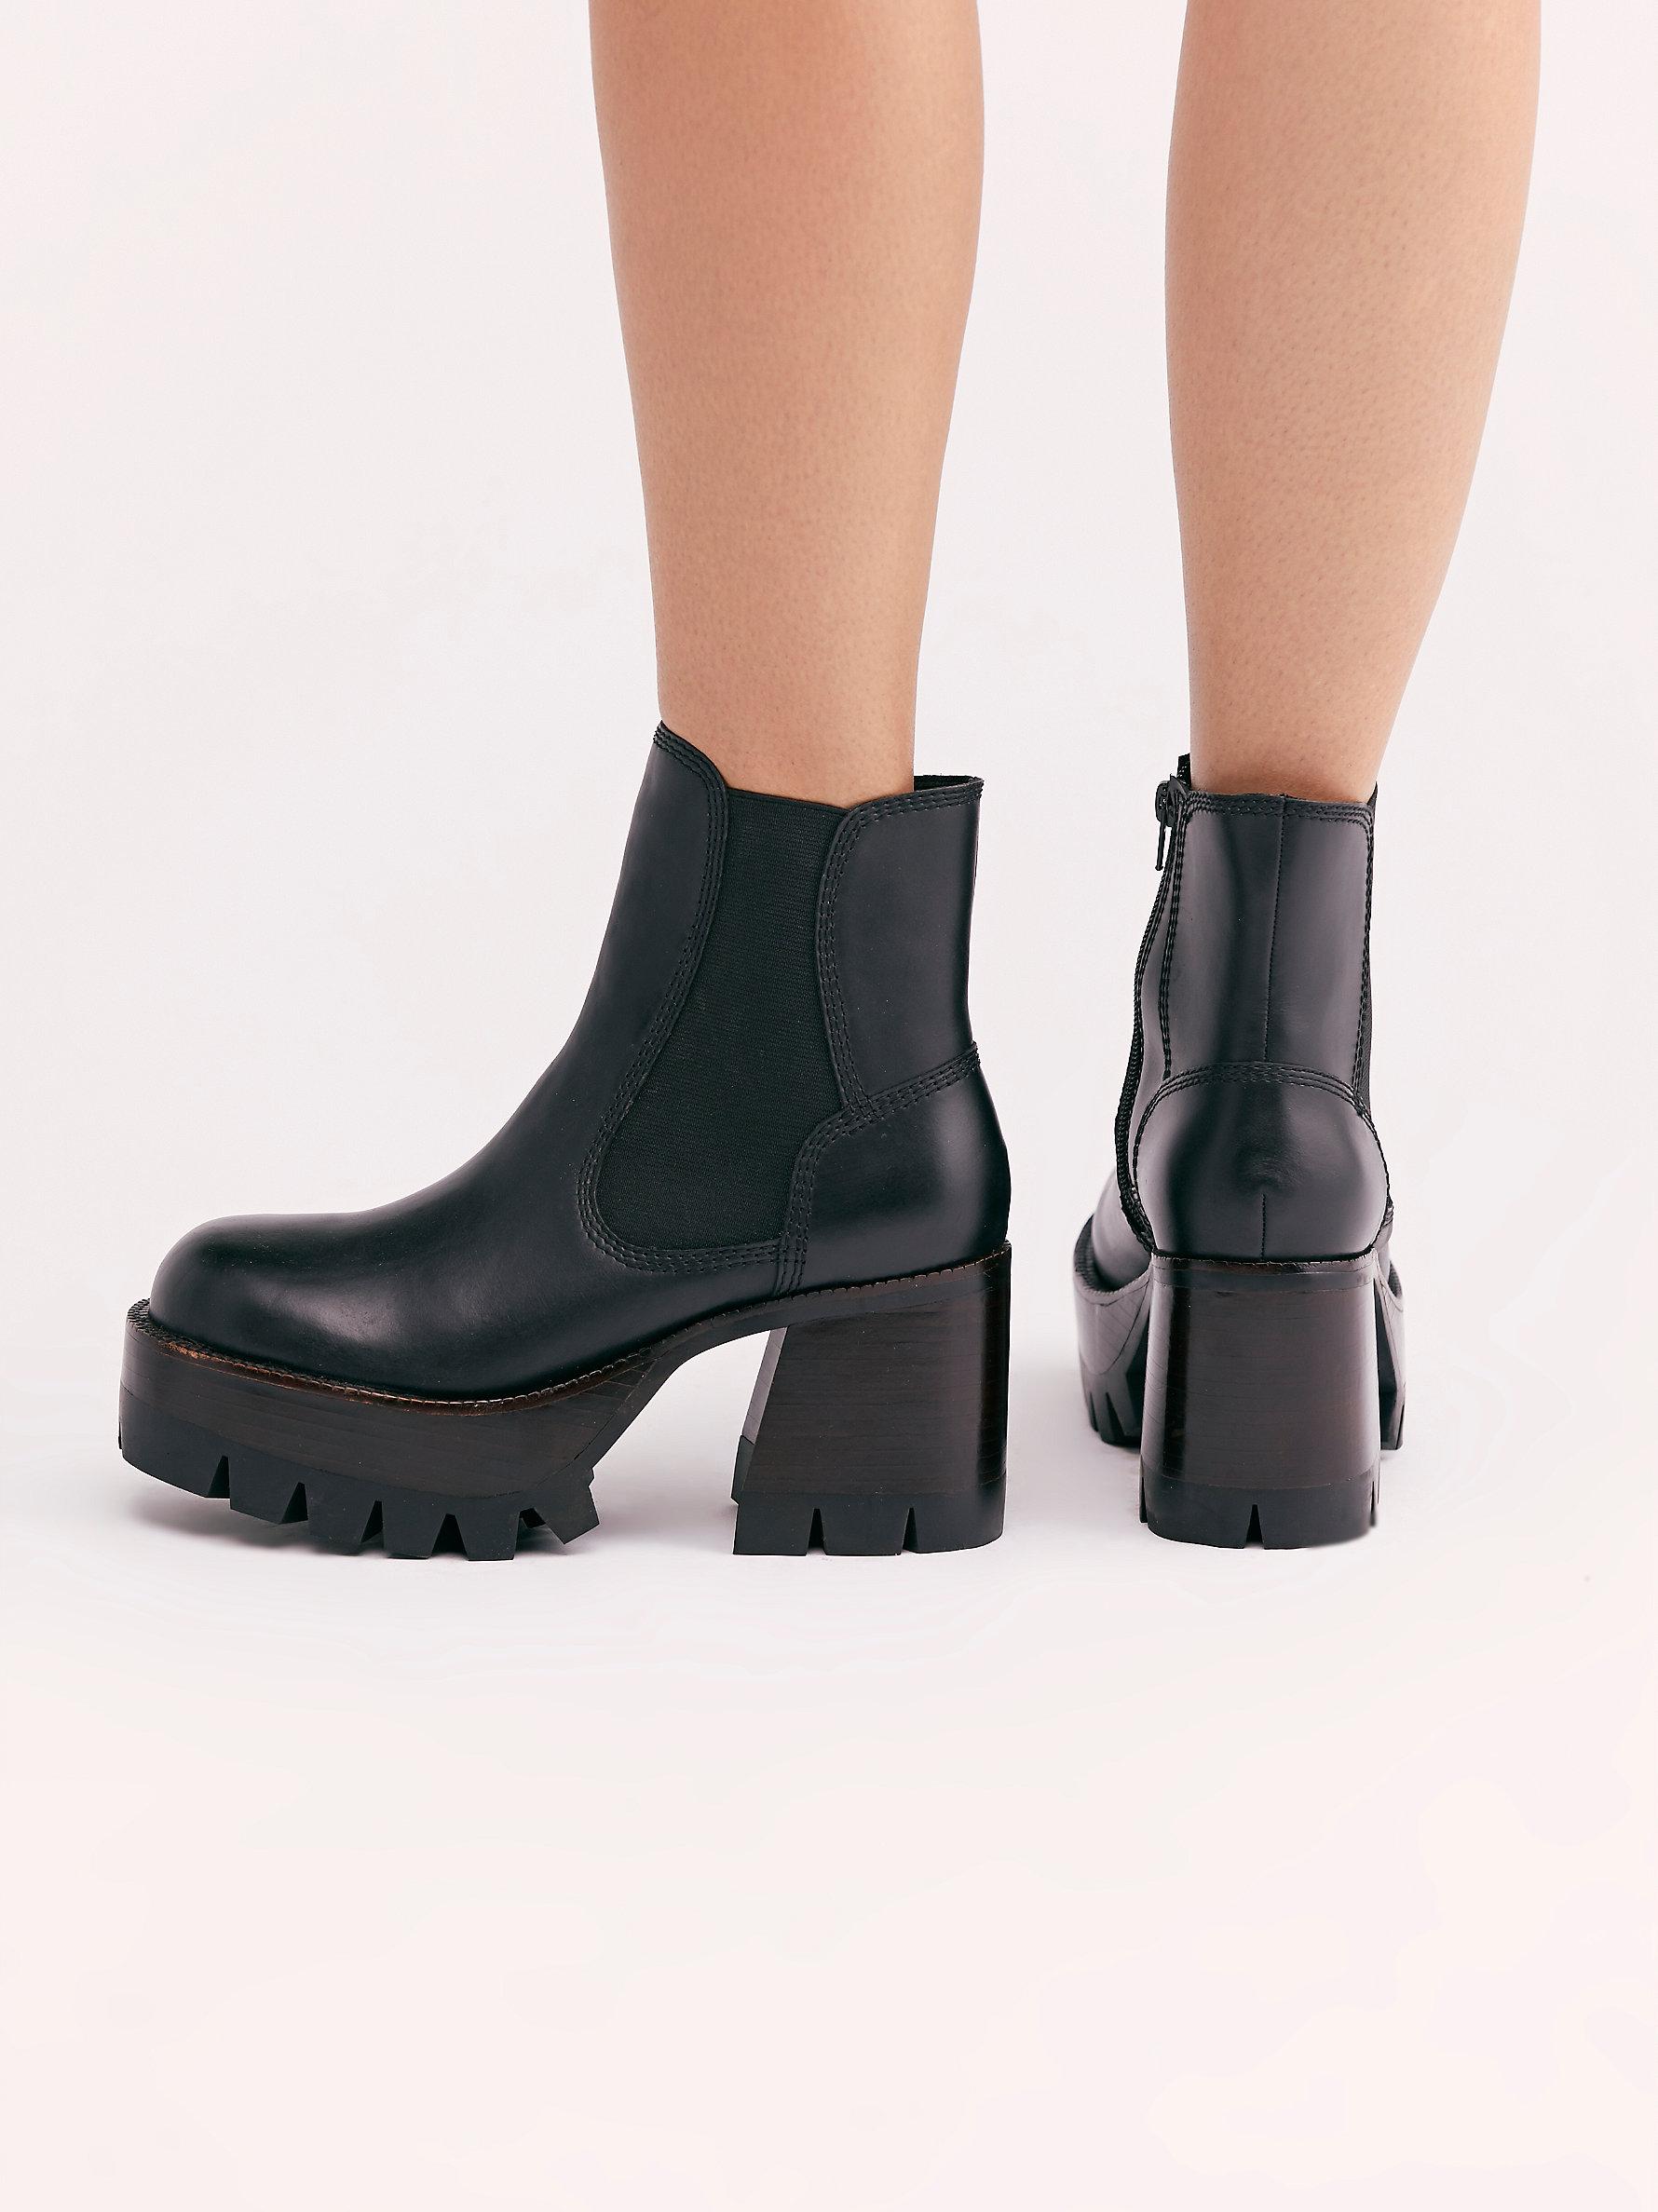 Free People Rubber Preston Platform Ankle Boots in Black - Lyst